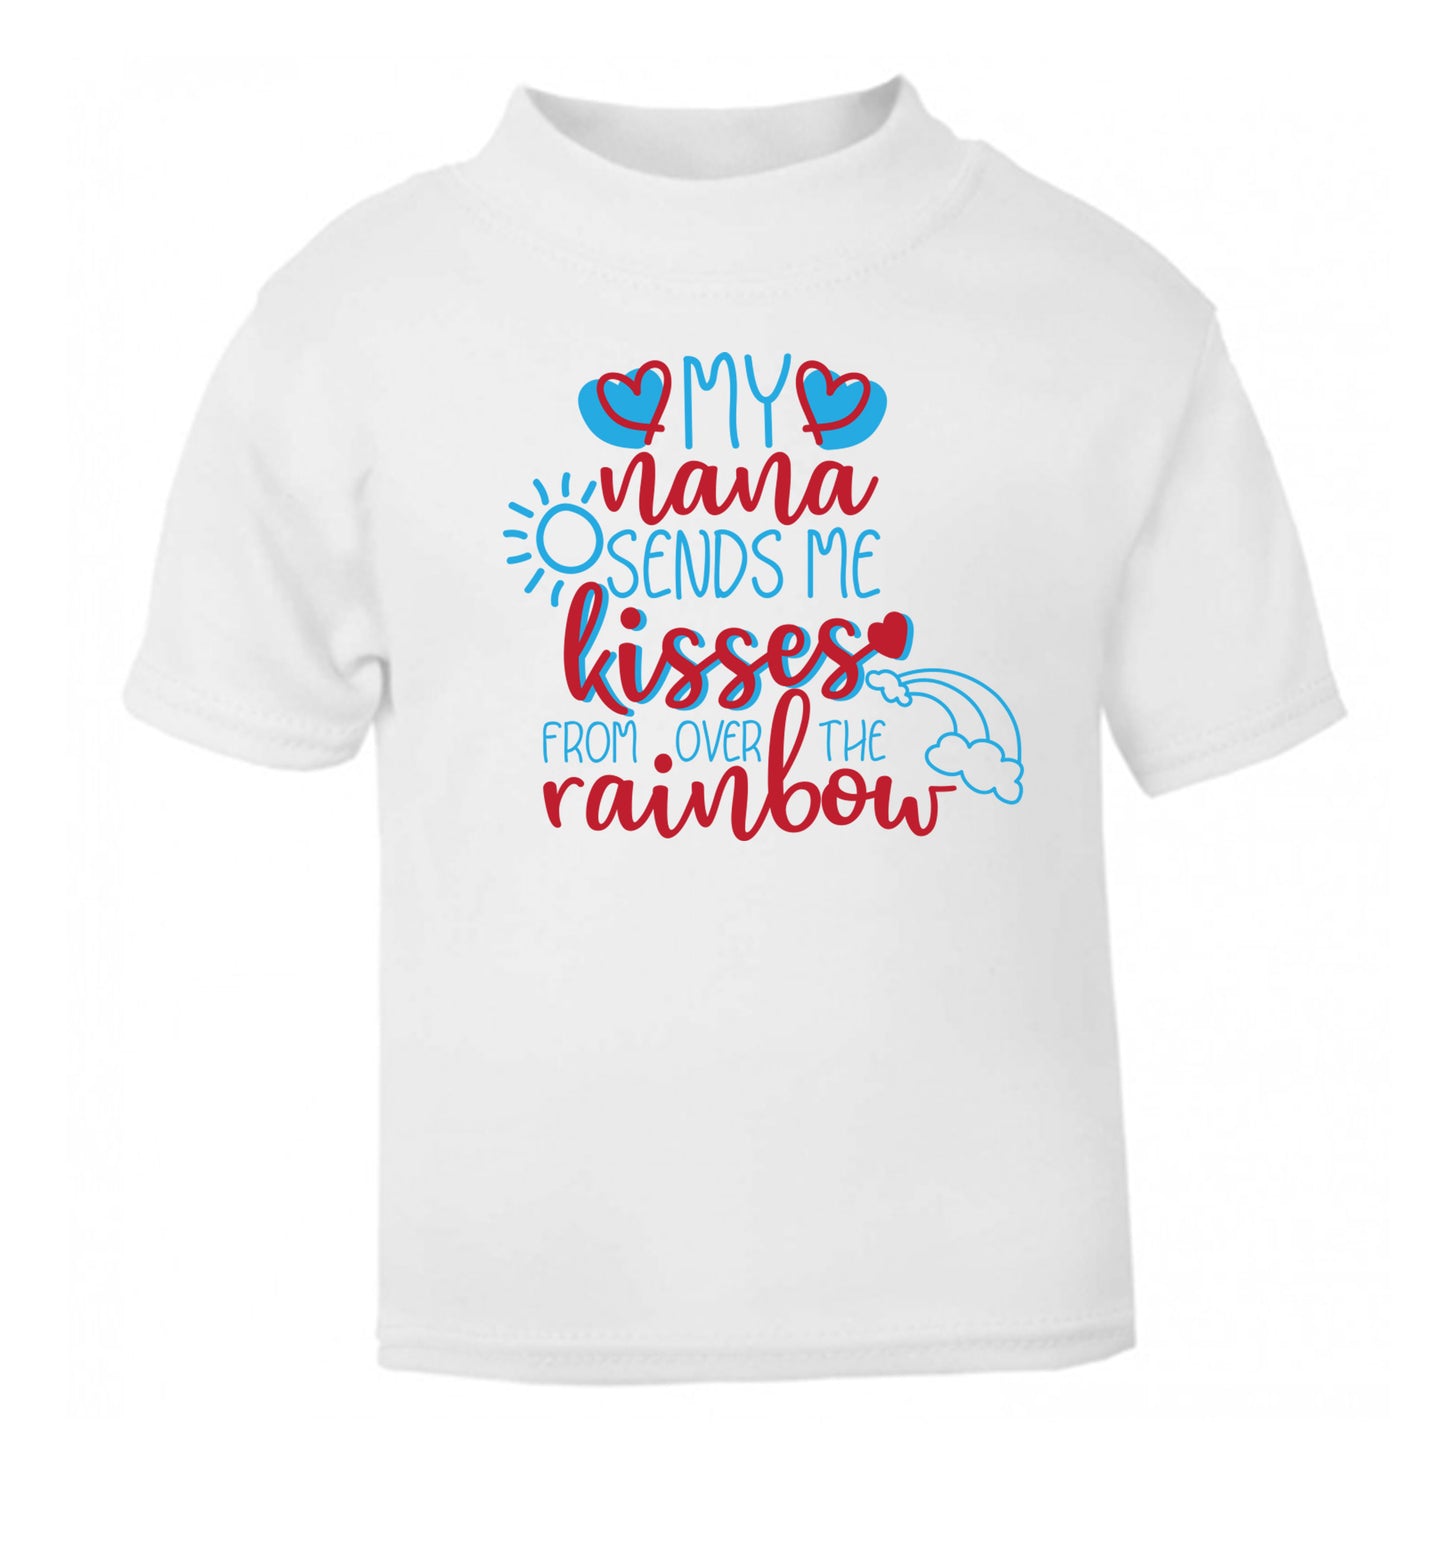 My nana sends me kisses from over the rainbow white Baby Toddler Tshirt 2 Years